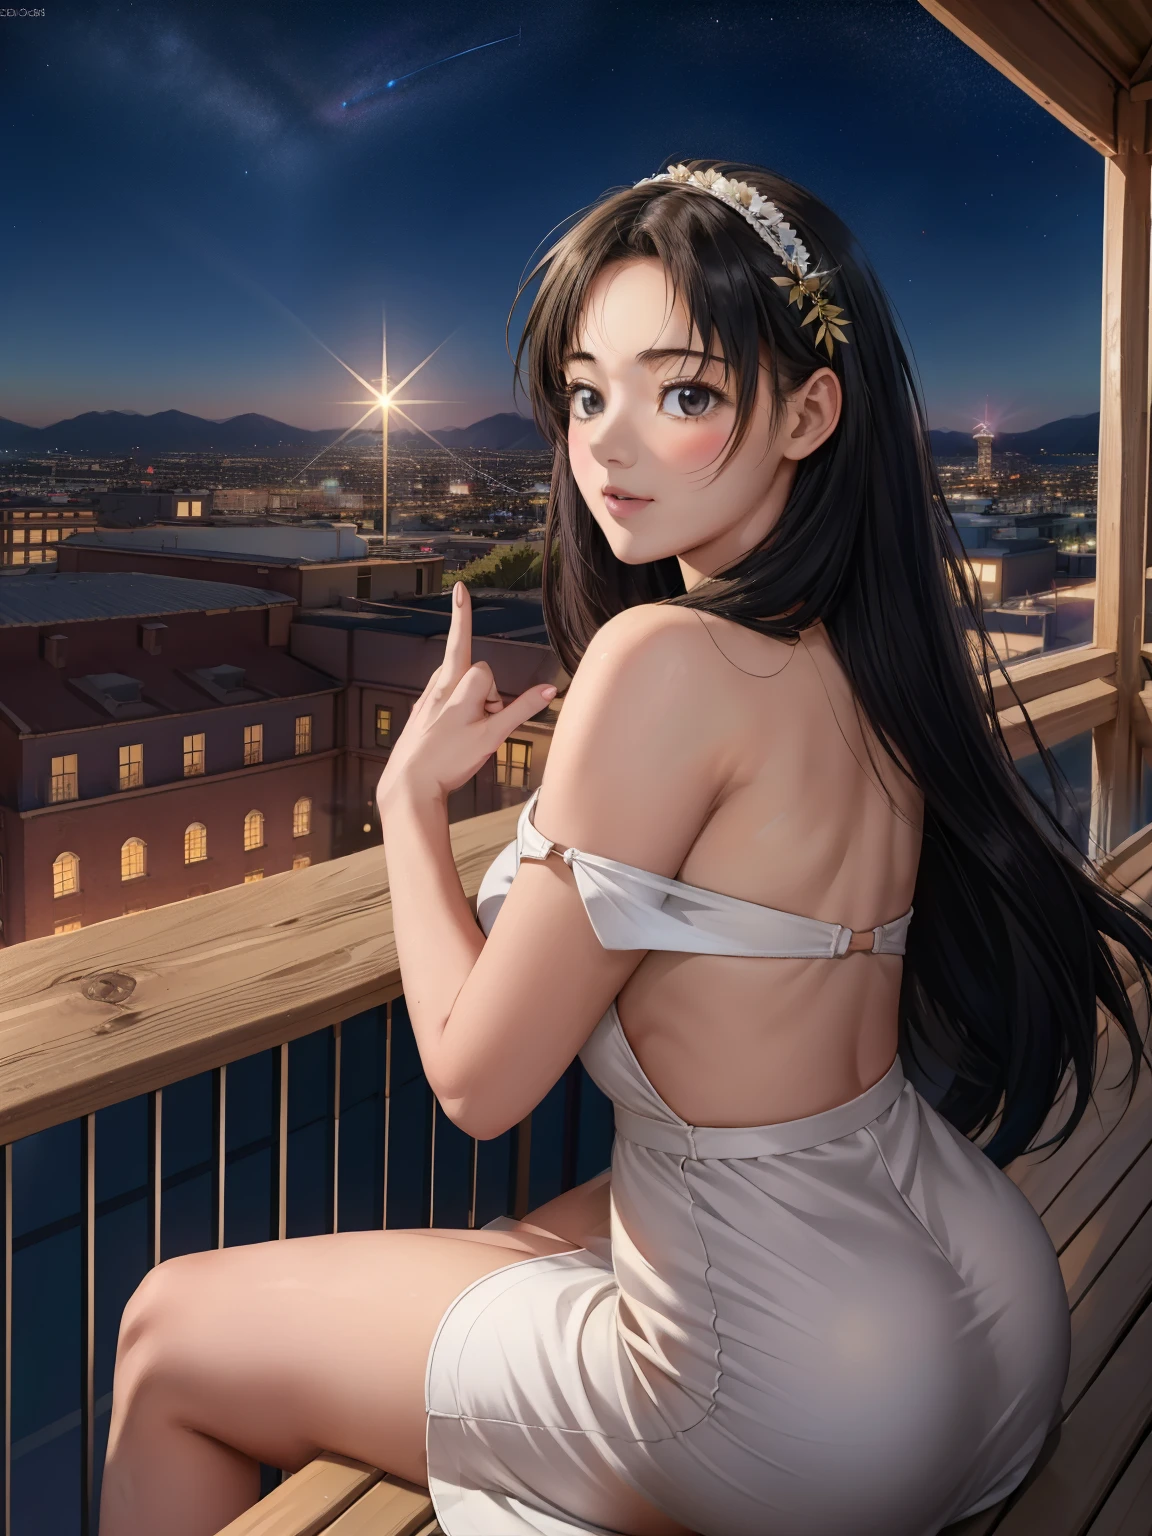 highest quality, masterpiece, Very detailed, Detailed Background, anime, 1 girl, Young girl, Short girl, sf, sf, Outdoor, night, Starry Sky, greenhouse, giant structure, Biodome, Wind景, scenery, horizon, rooftop, sitting on rooftop, Wind, avert your eyes, Atmospheric lighting, Focus Only, close, From the side, Written boundary depth, Bokeh, Shooting from behind, The clothes are tight and the figure is clearly visible, ((Draw your fingers carefully:1.5))
